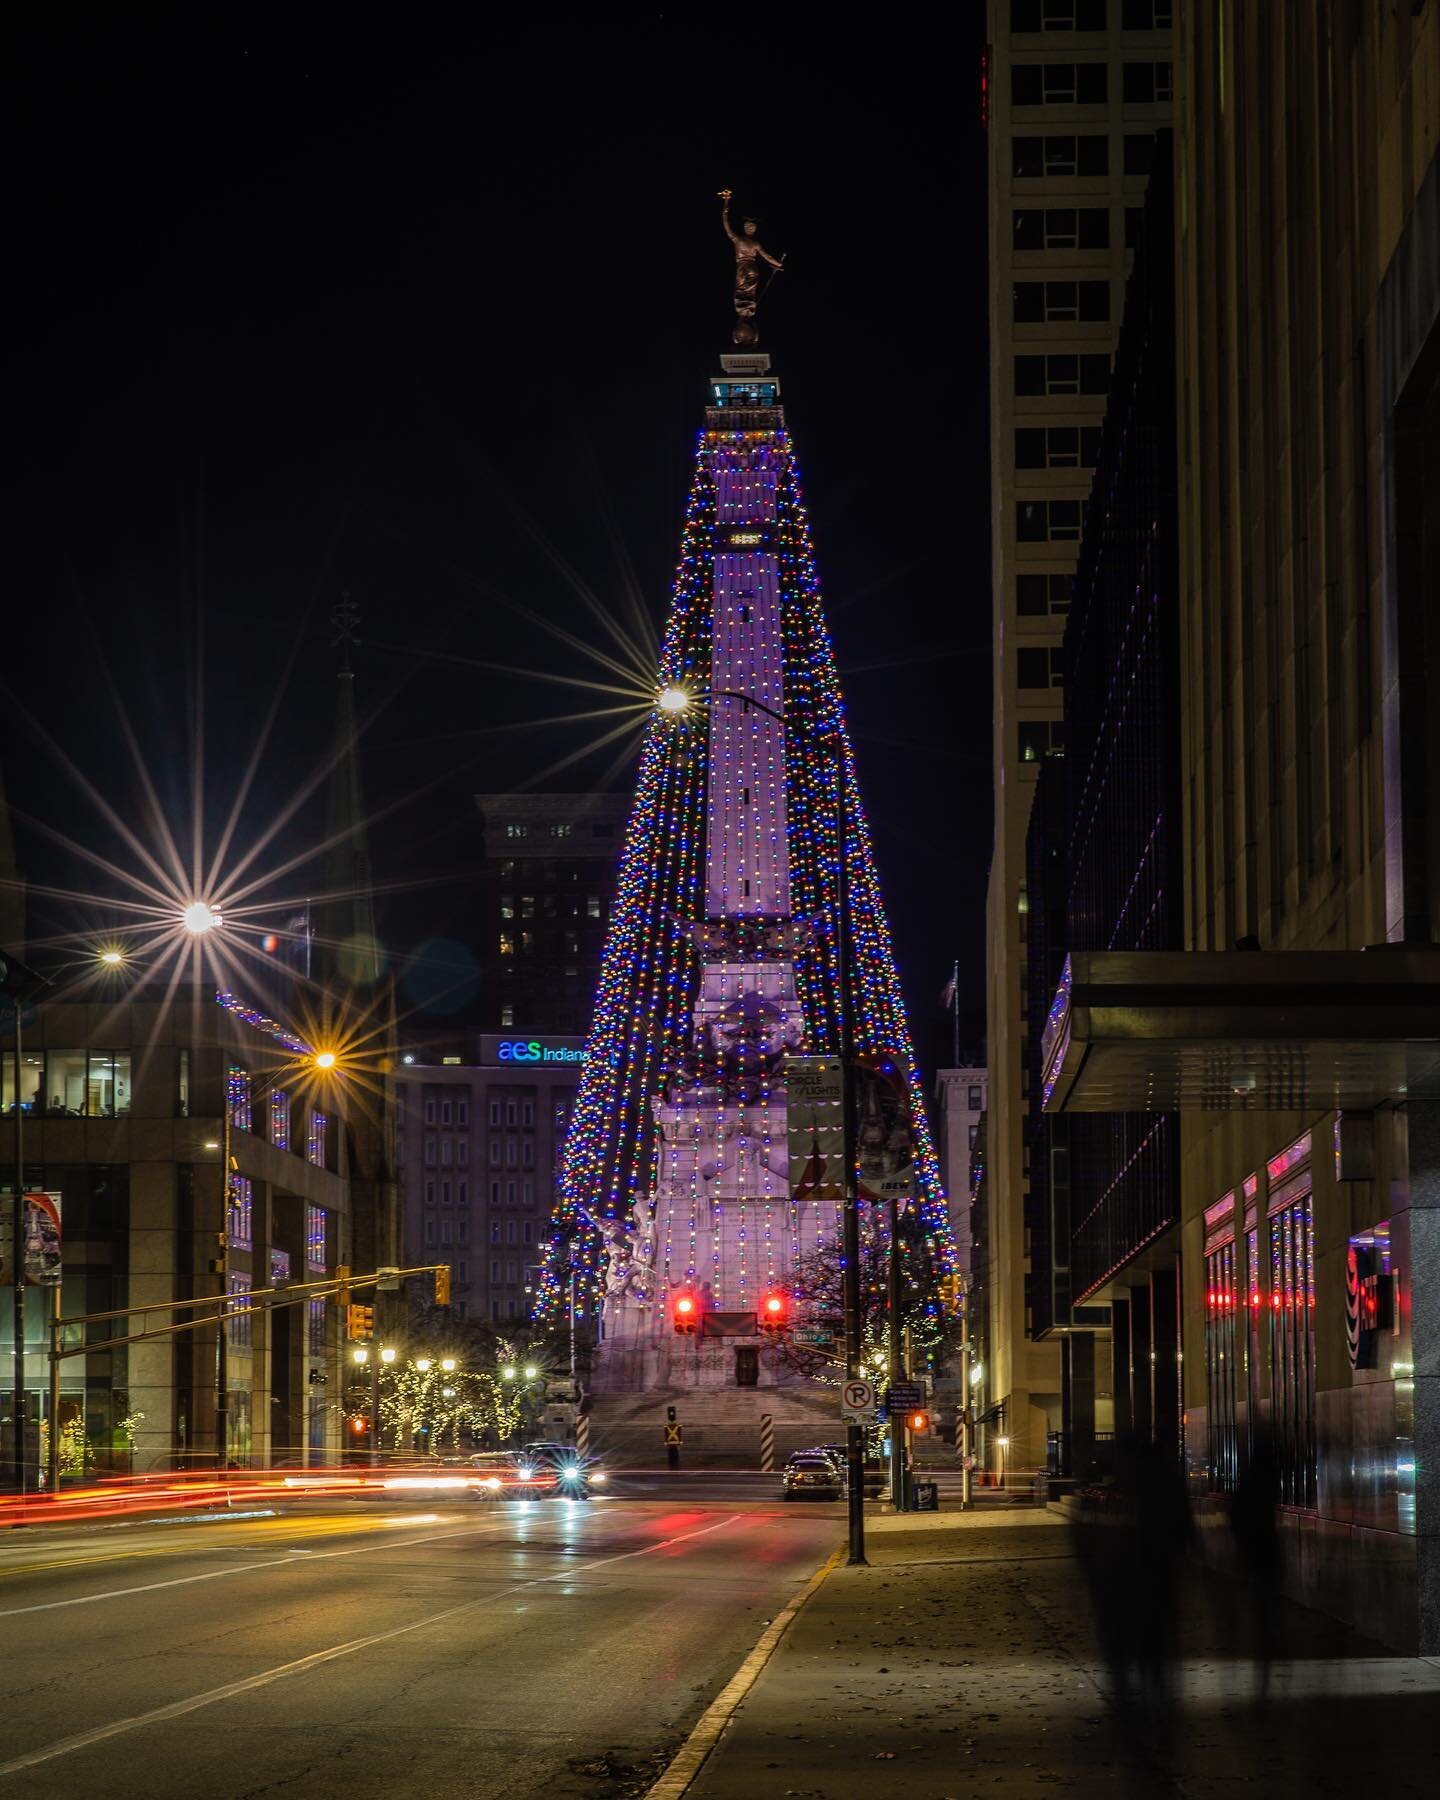 Man I love this city

#indianapolis #downtown #indianapolisphotographer